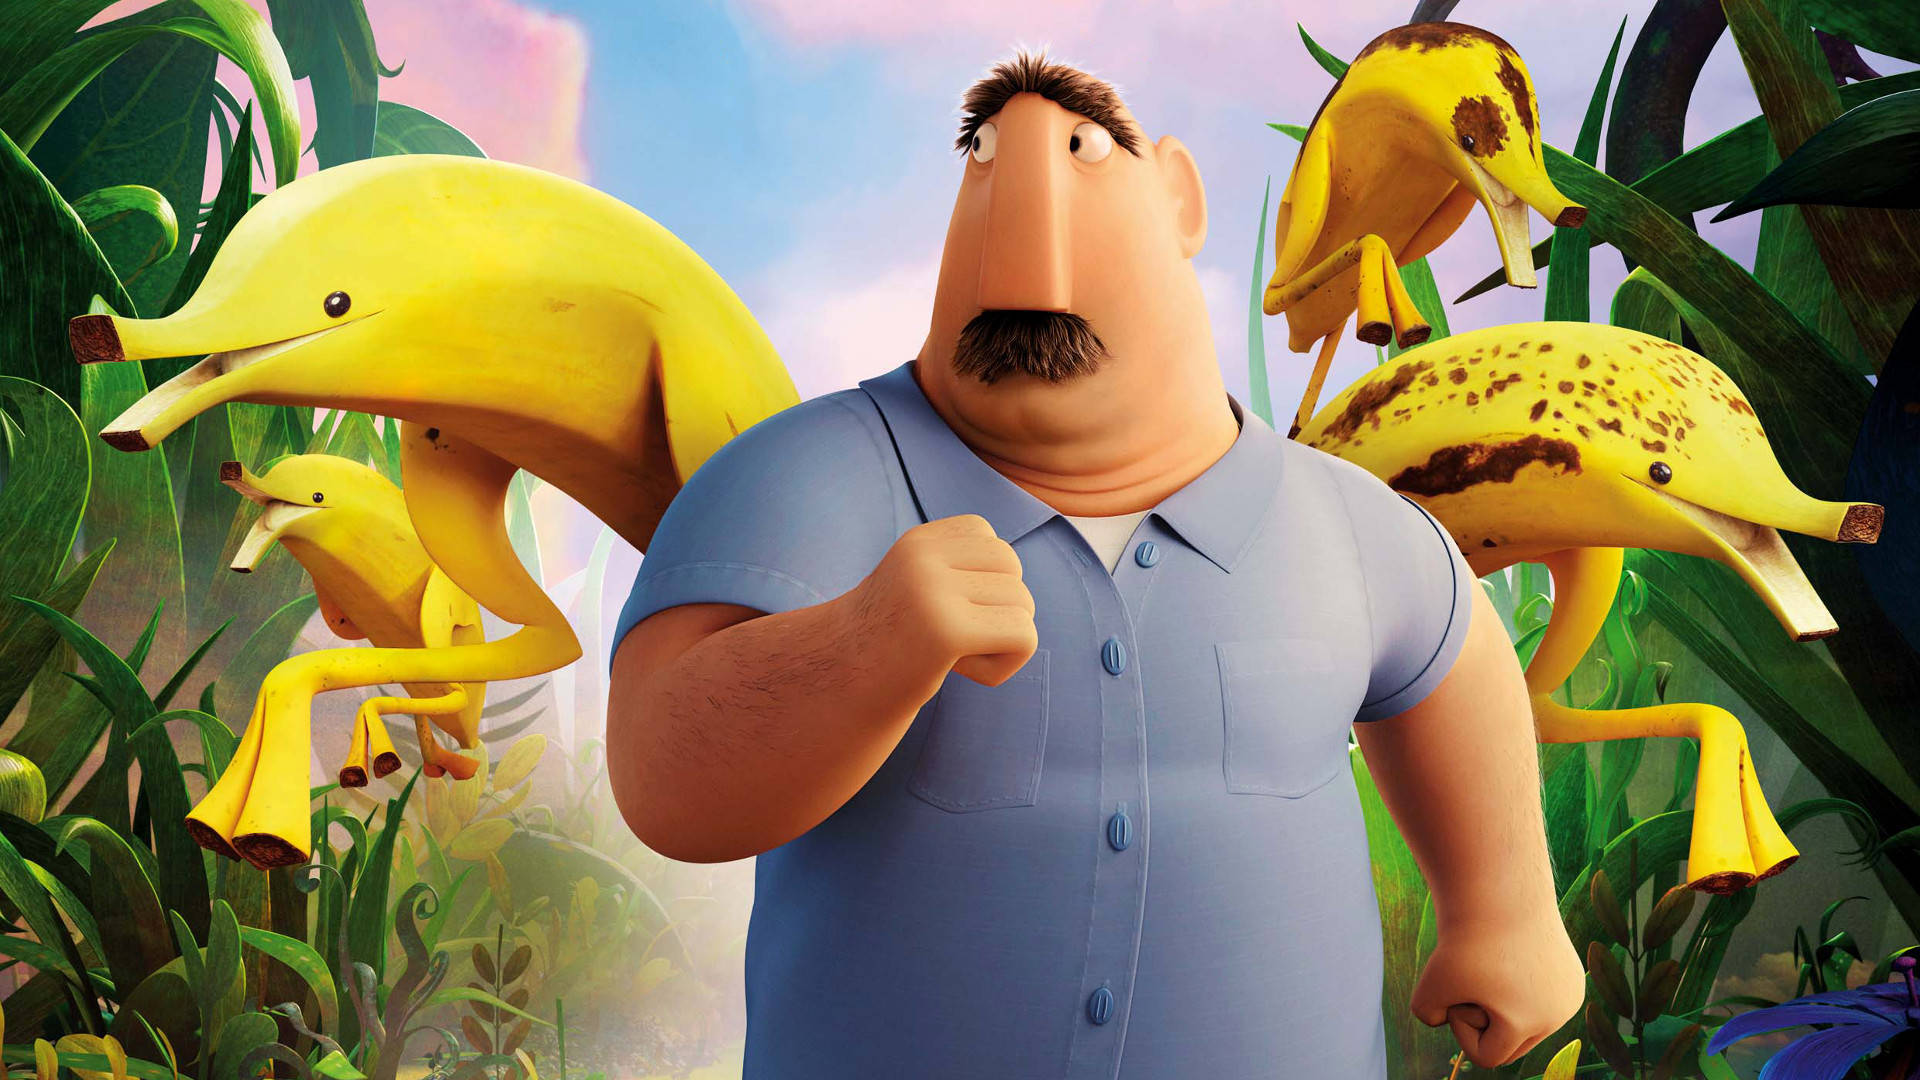 Tim And Bananostrich From Cloudy With A Chance Of Meatballs 2 Wallpaper